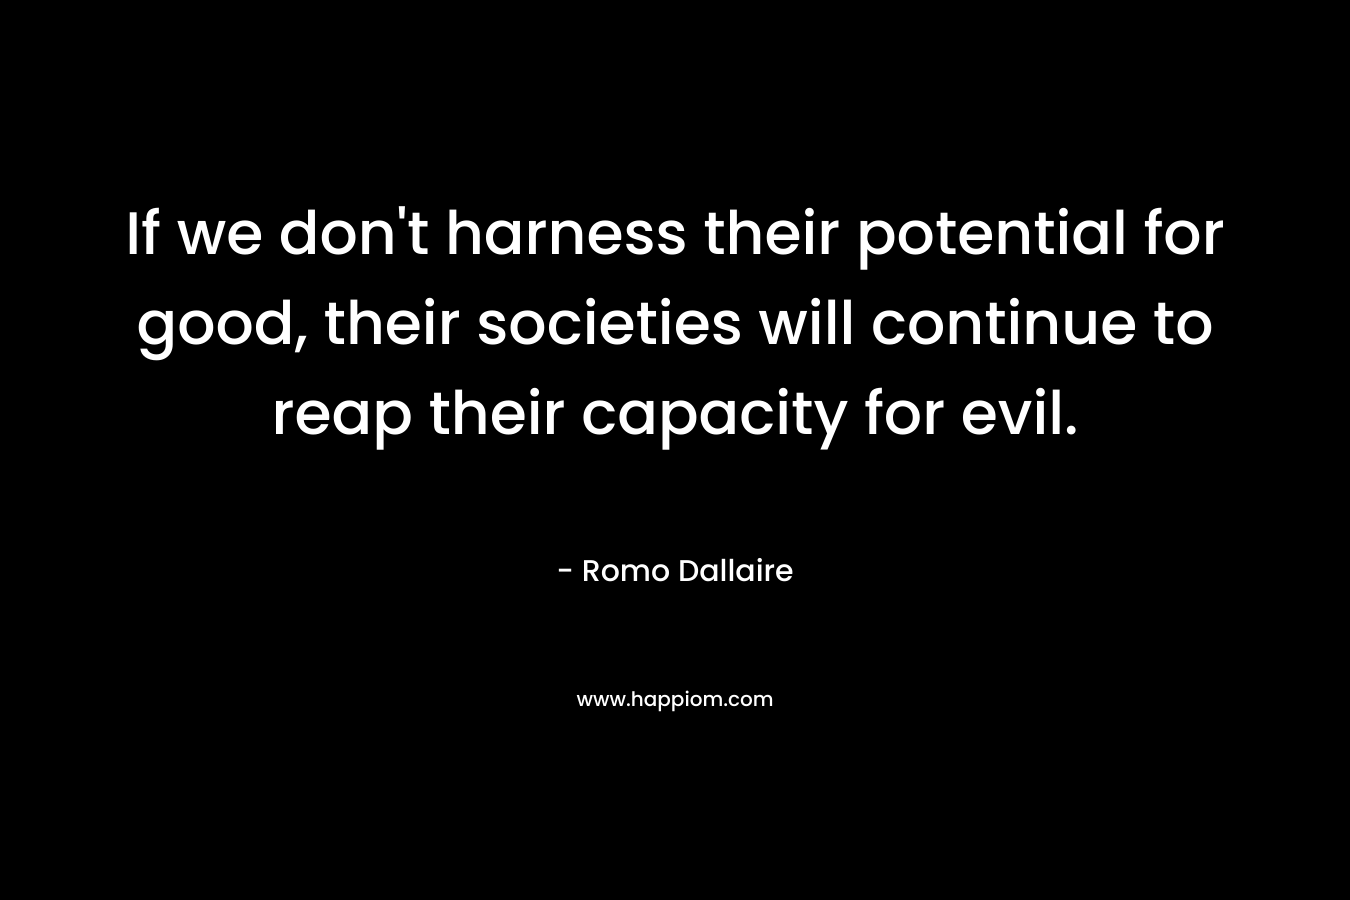 If we don't harness their potential for good, their societies will continue to reap their capacity for evil.